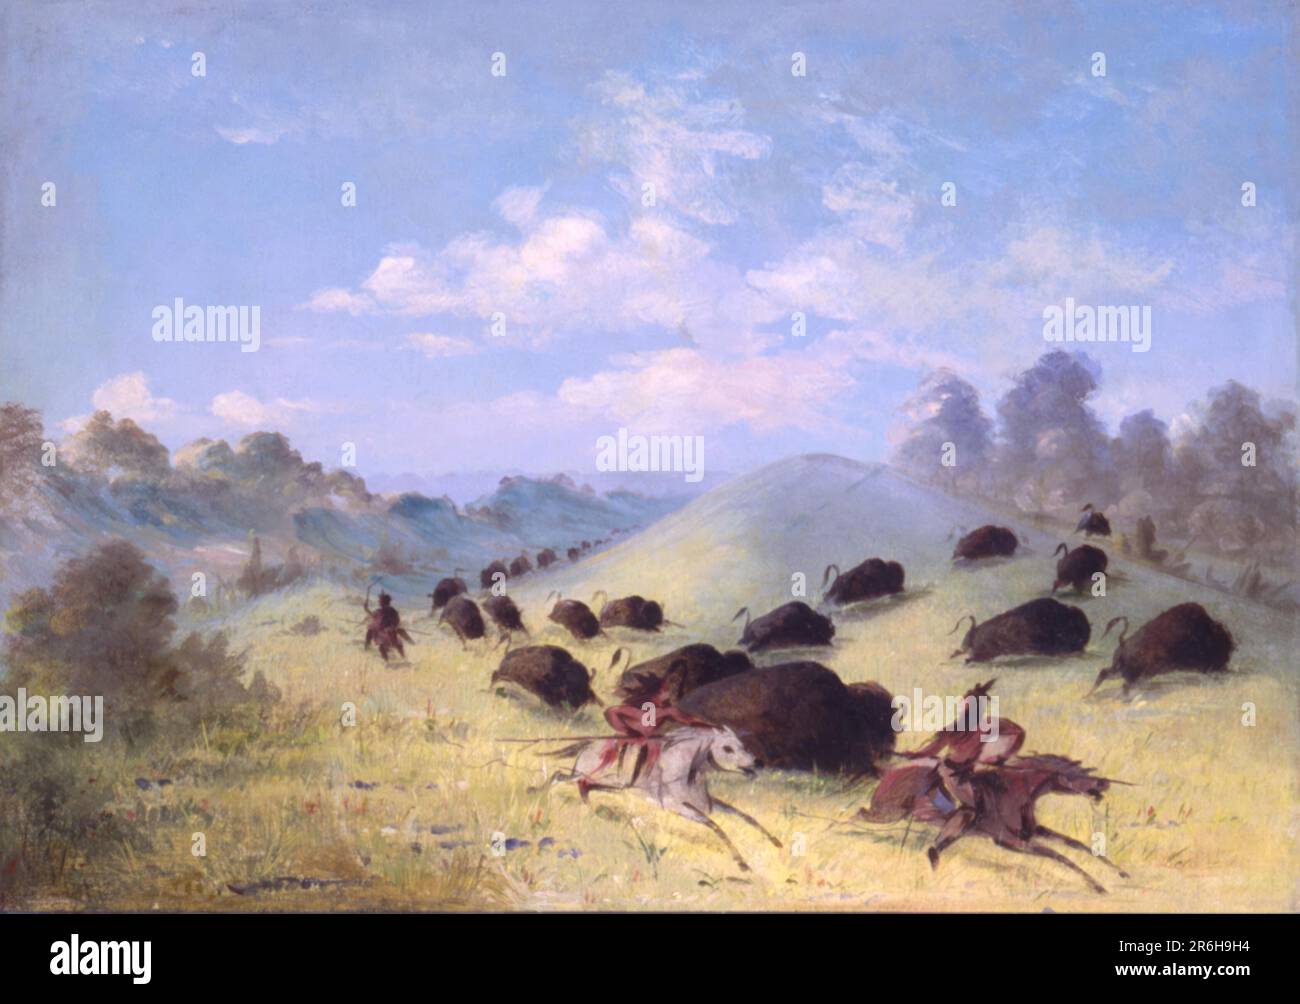 Comanche Indians Chasing Buffalo with Lances and Bows. oil on canvas. Date: 1846-1848. Museum: Smithsonian American Art Museum. Stock Photo